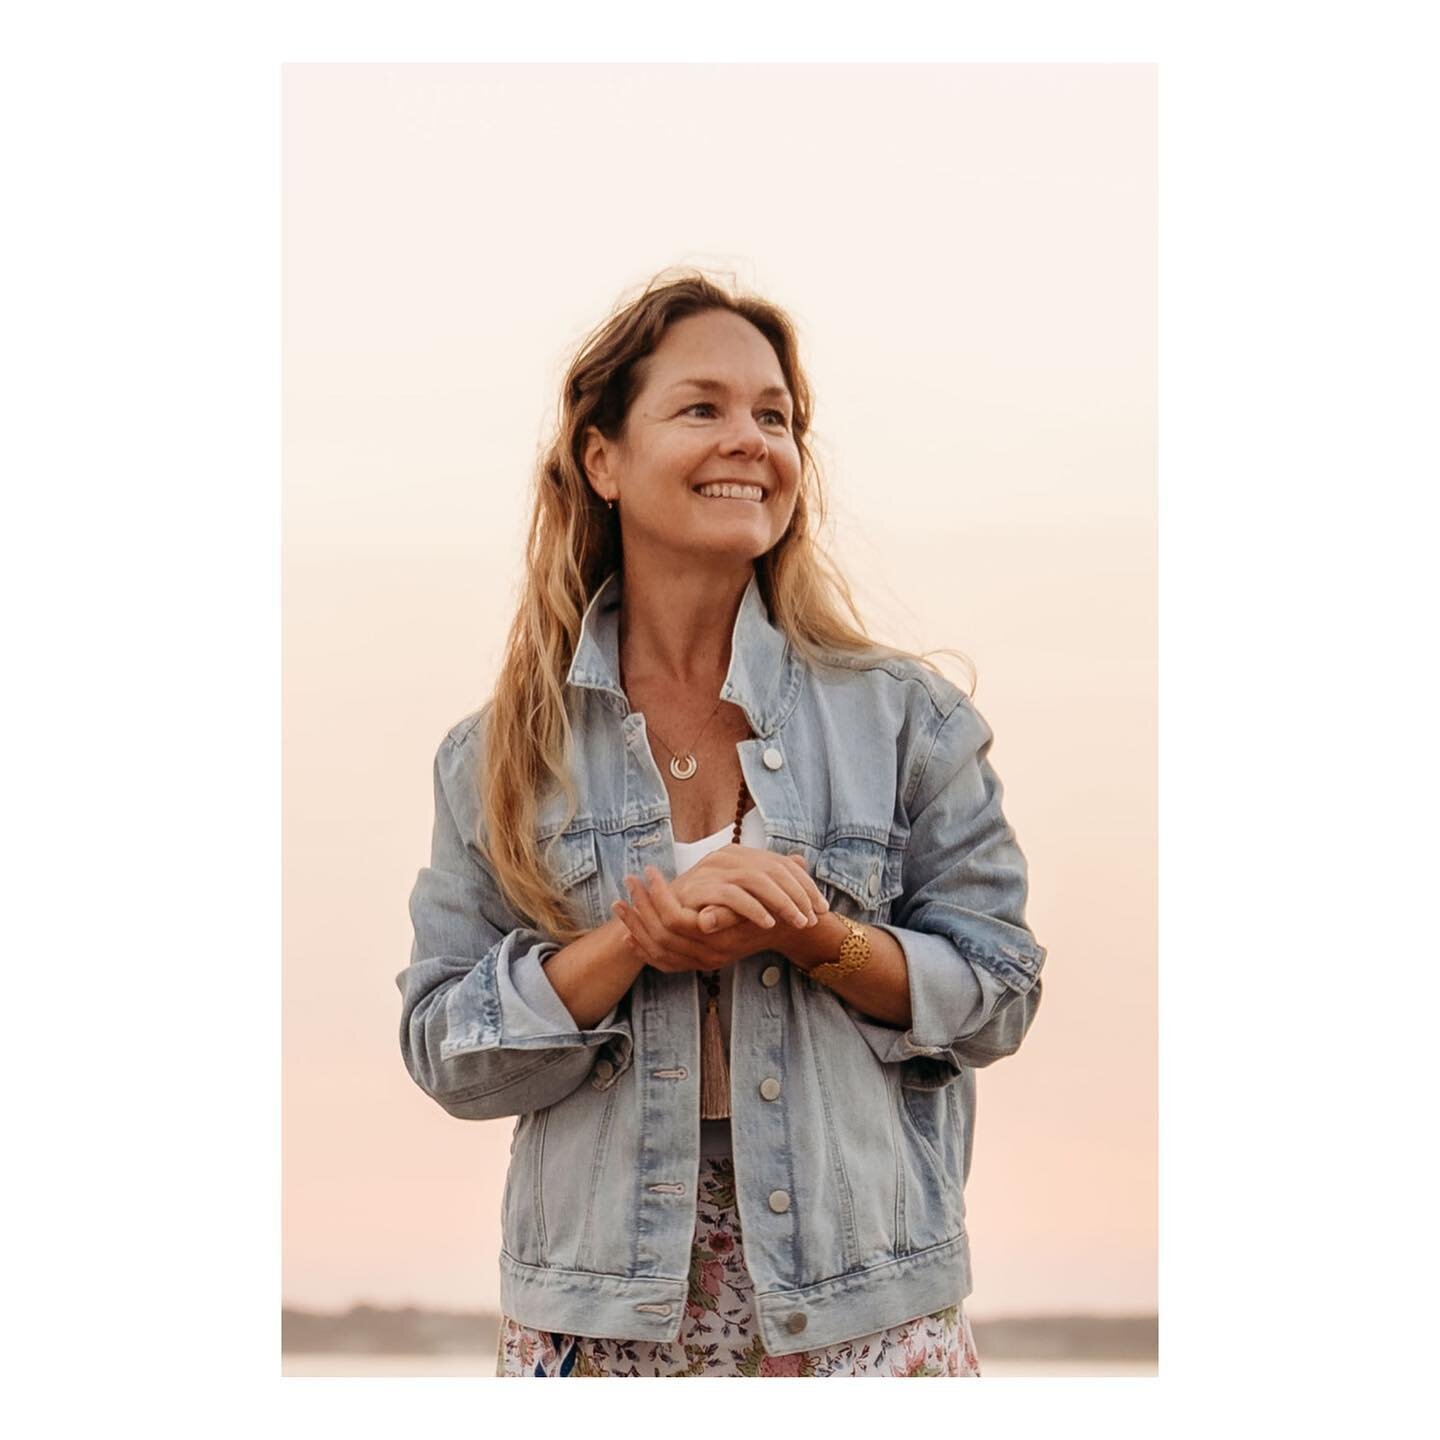 &bull;GIFT FROM THE SEA: A RETREAT&bull;
YOUR MENTOR
Allison Schumann is an International Wellness Facilitator and Spiritual Mentor who has woven 25+ years in luxury hospitality, education and the wellness industry with embodied experience in the mod